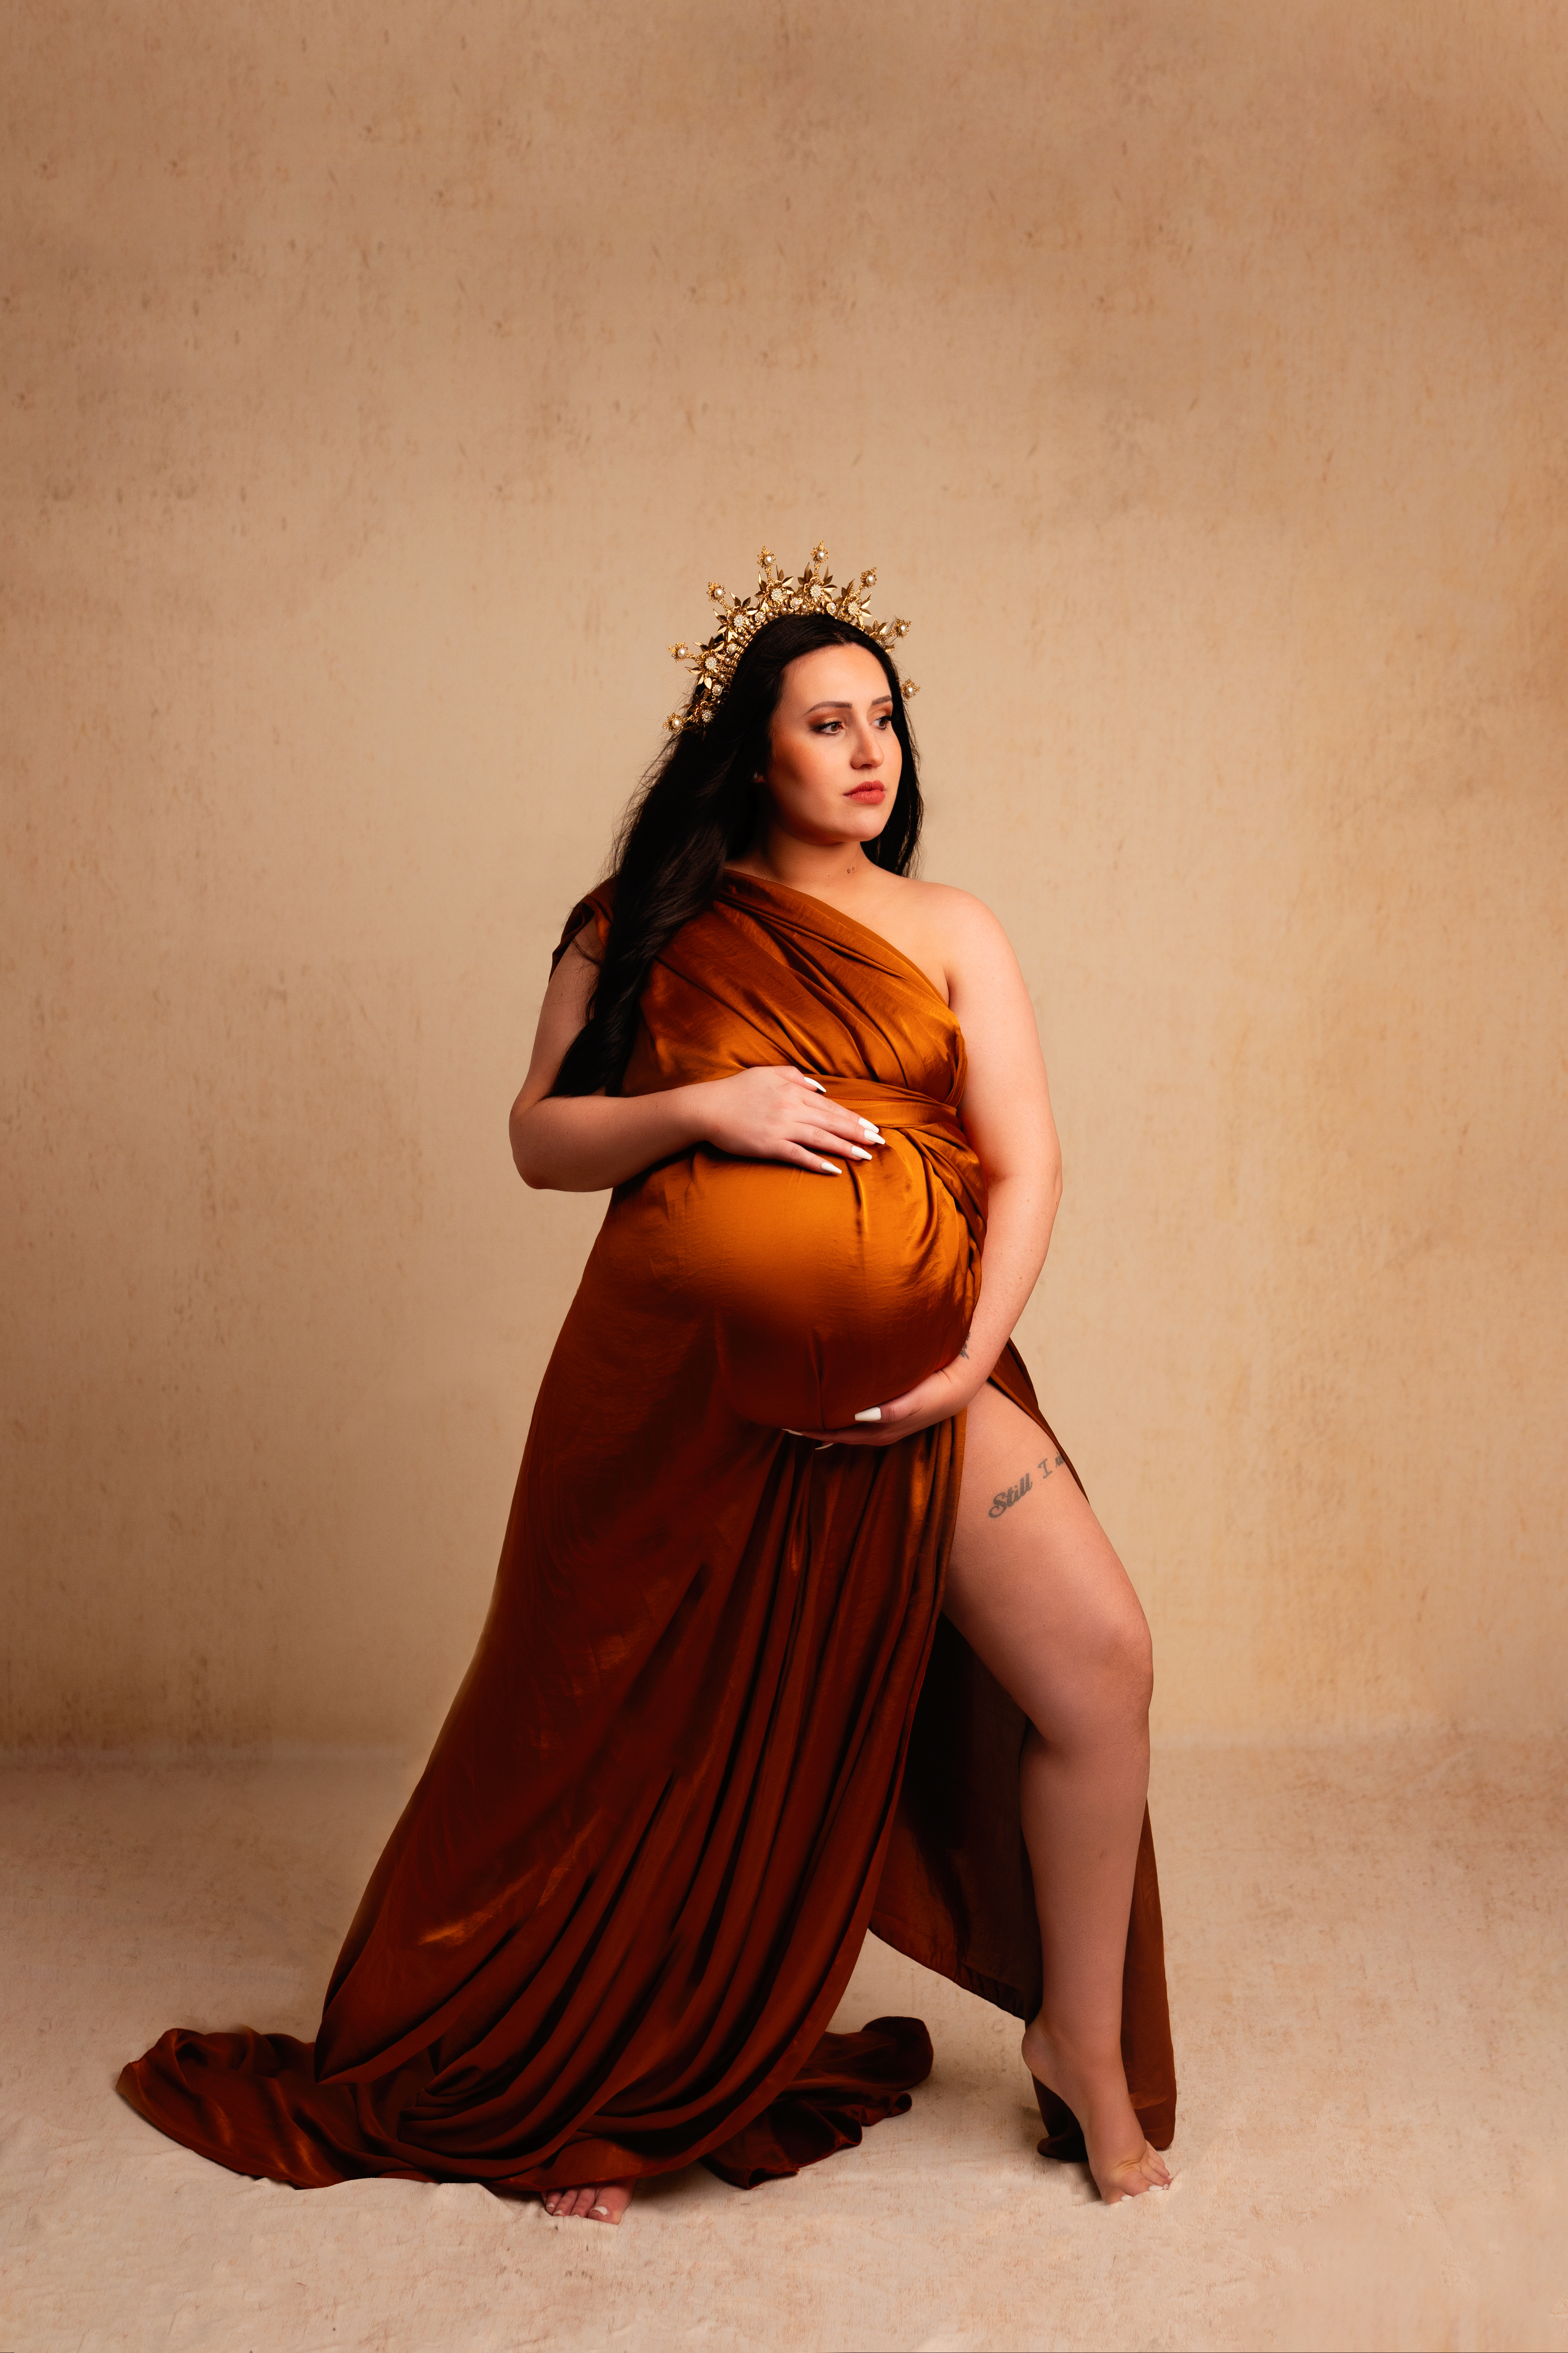 Grand rapids maternity photo shoot mother wearing gold wrap with gold crown